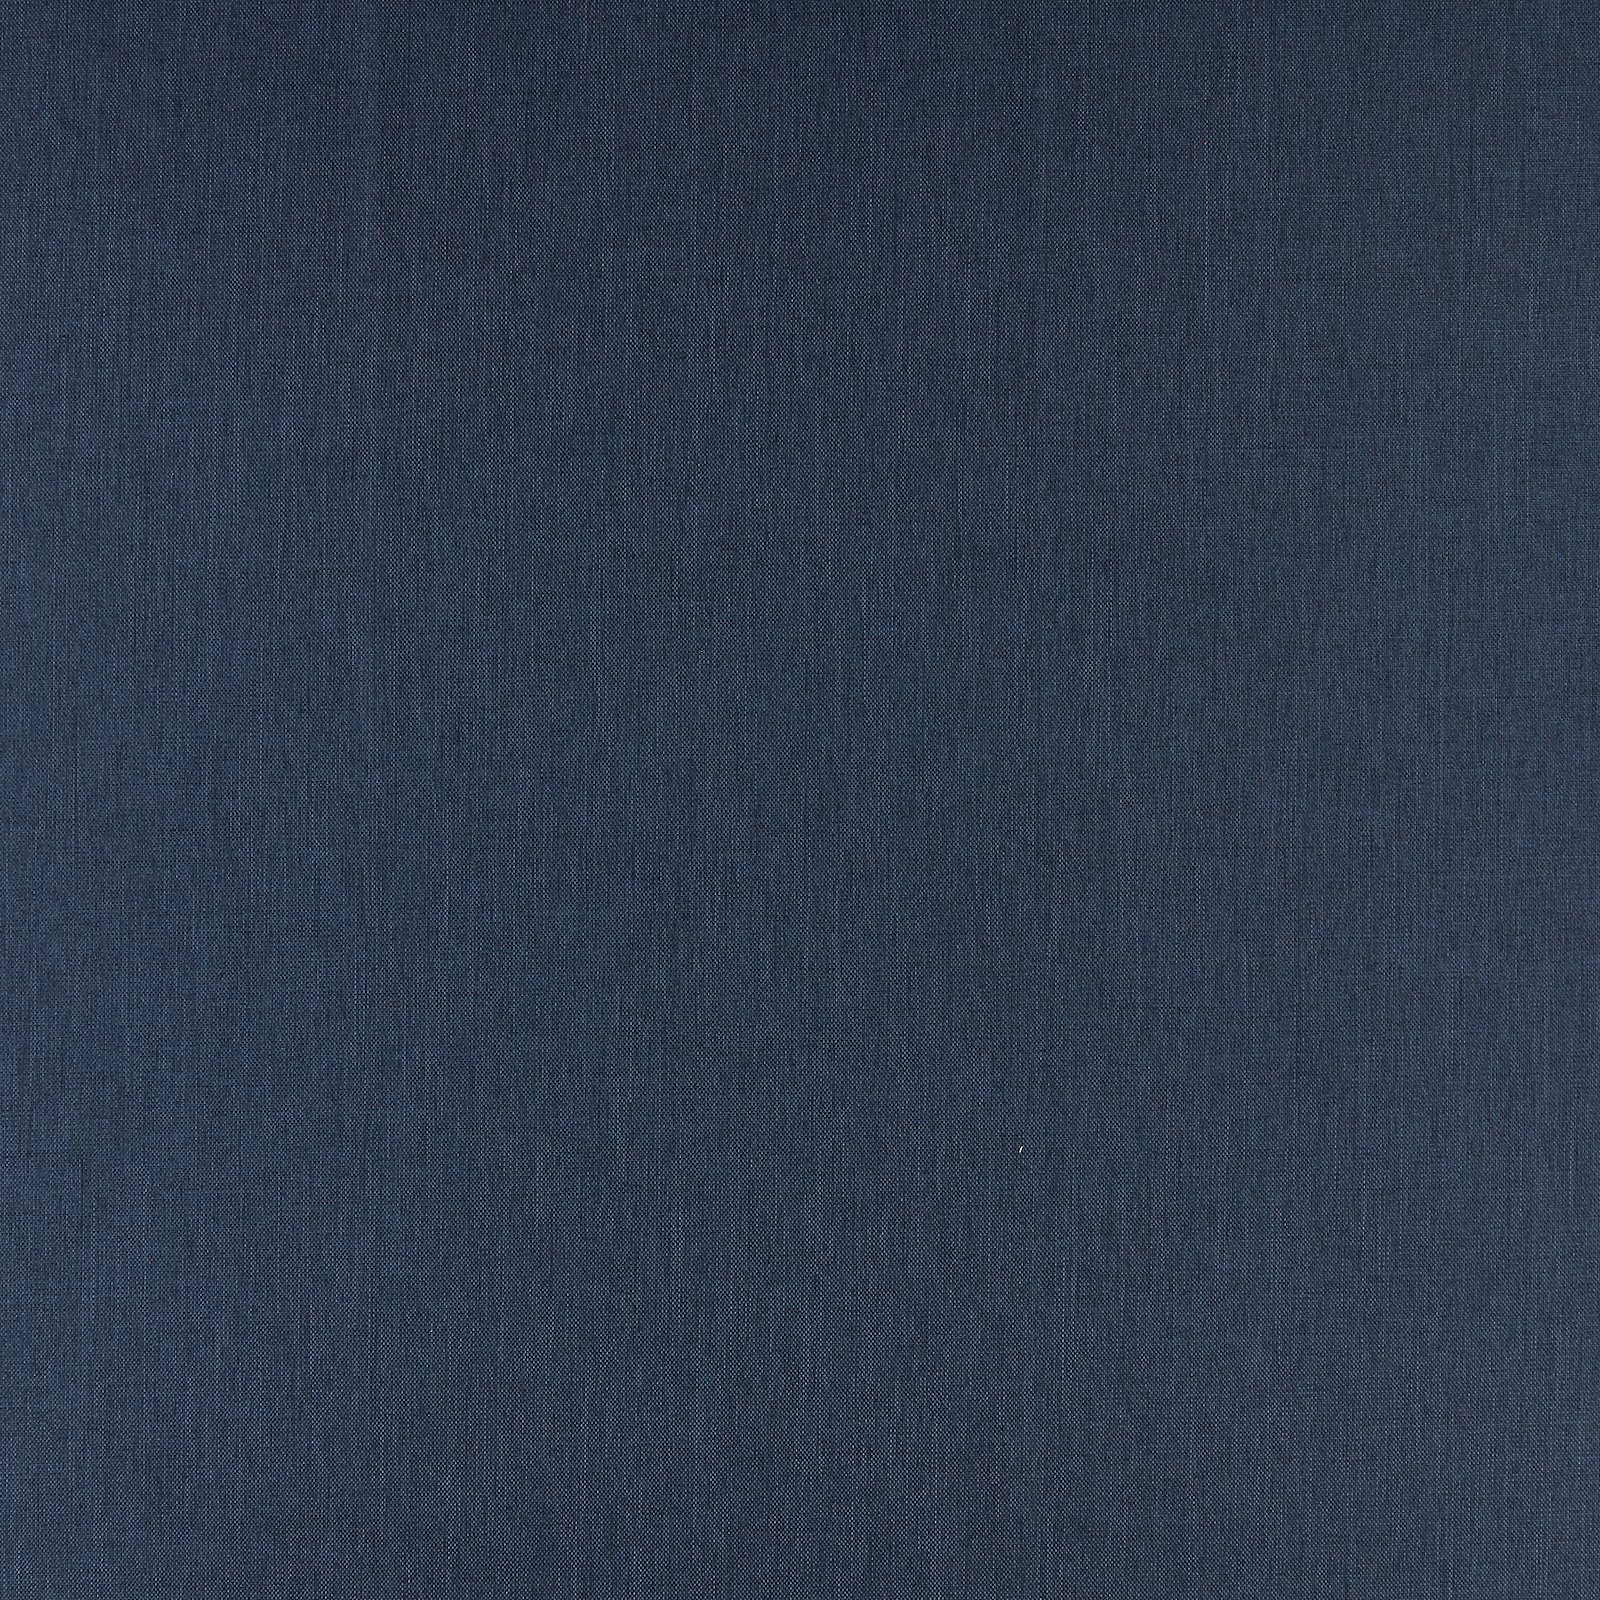 Upholstery fabric dark royal blue mel 826591_pack_solid